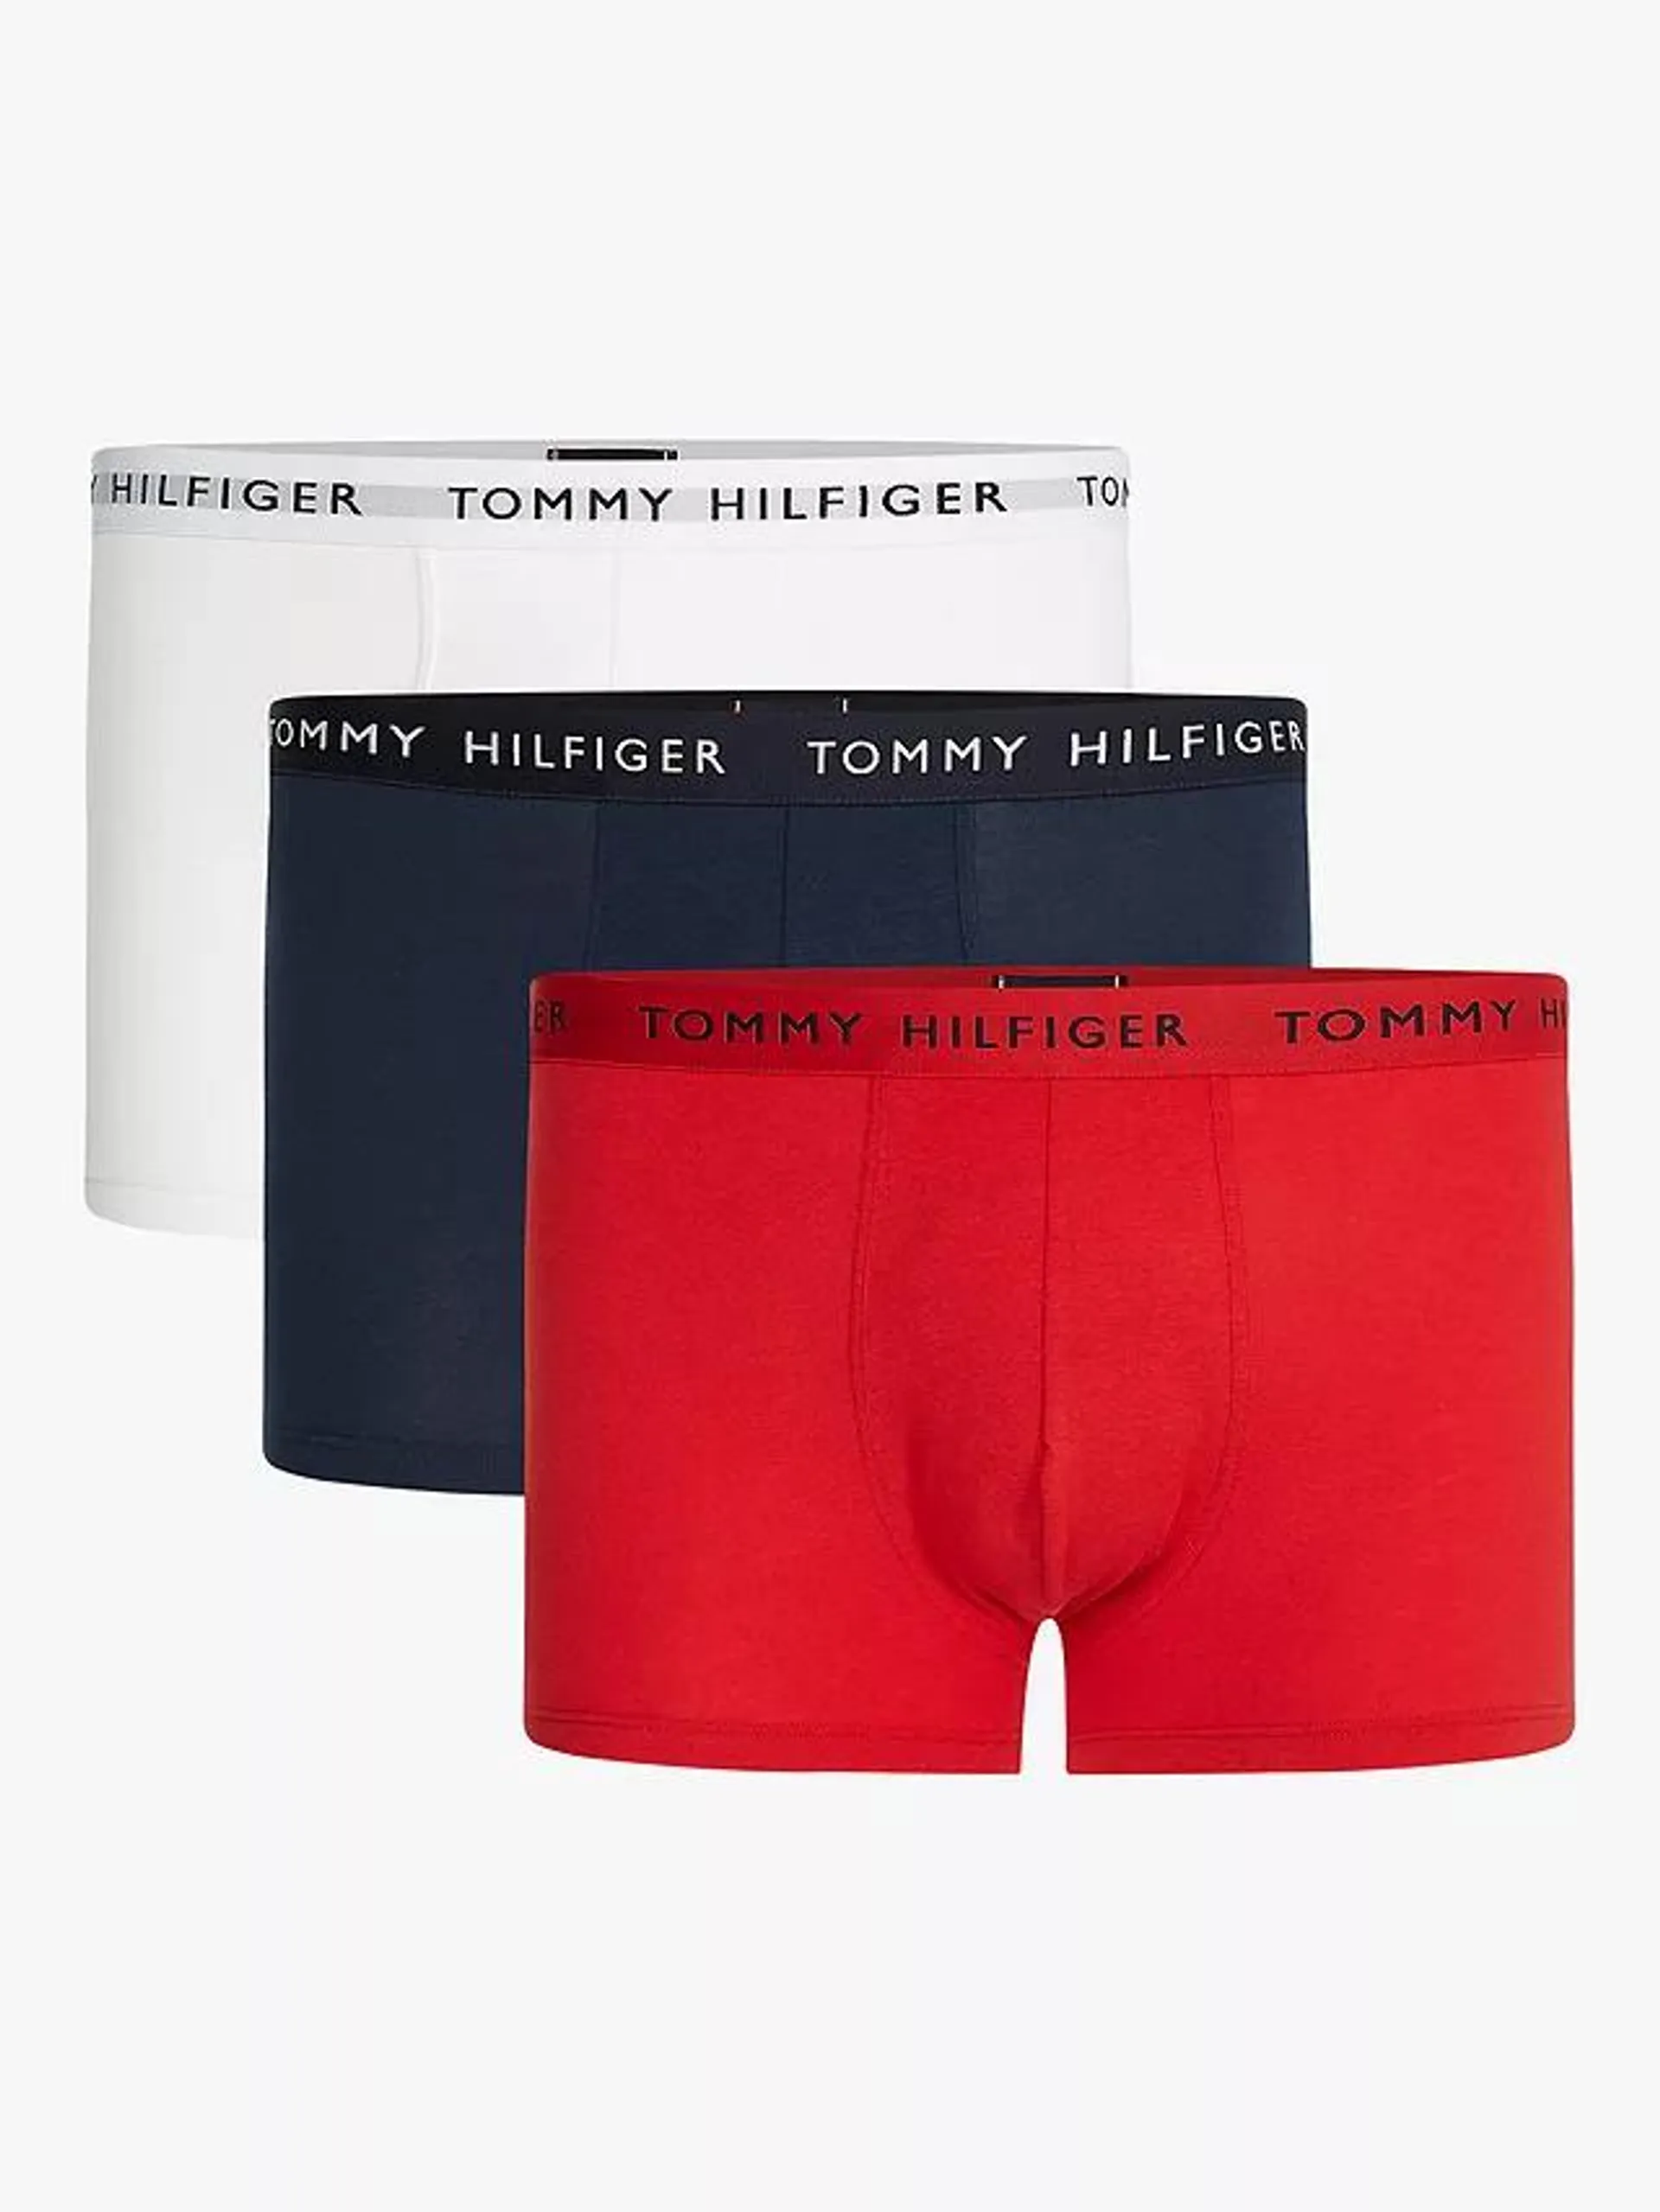 Tommy Hilfiger Essential Recycled Cotton Trunks, Pack of 3, White/Desert Sky/Primary Red